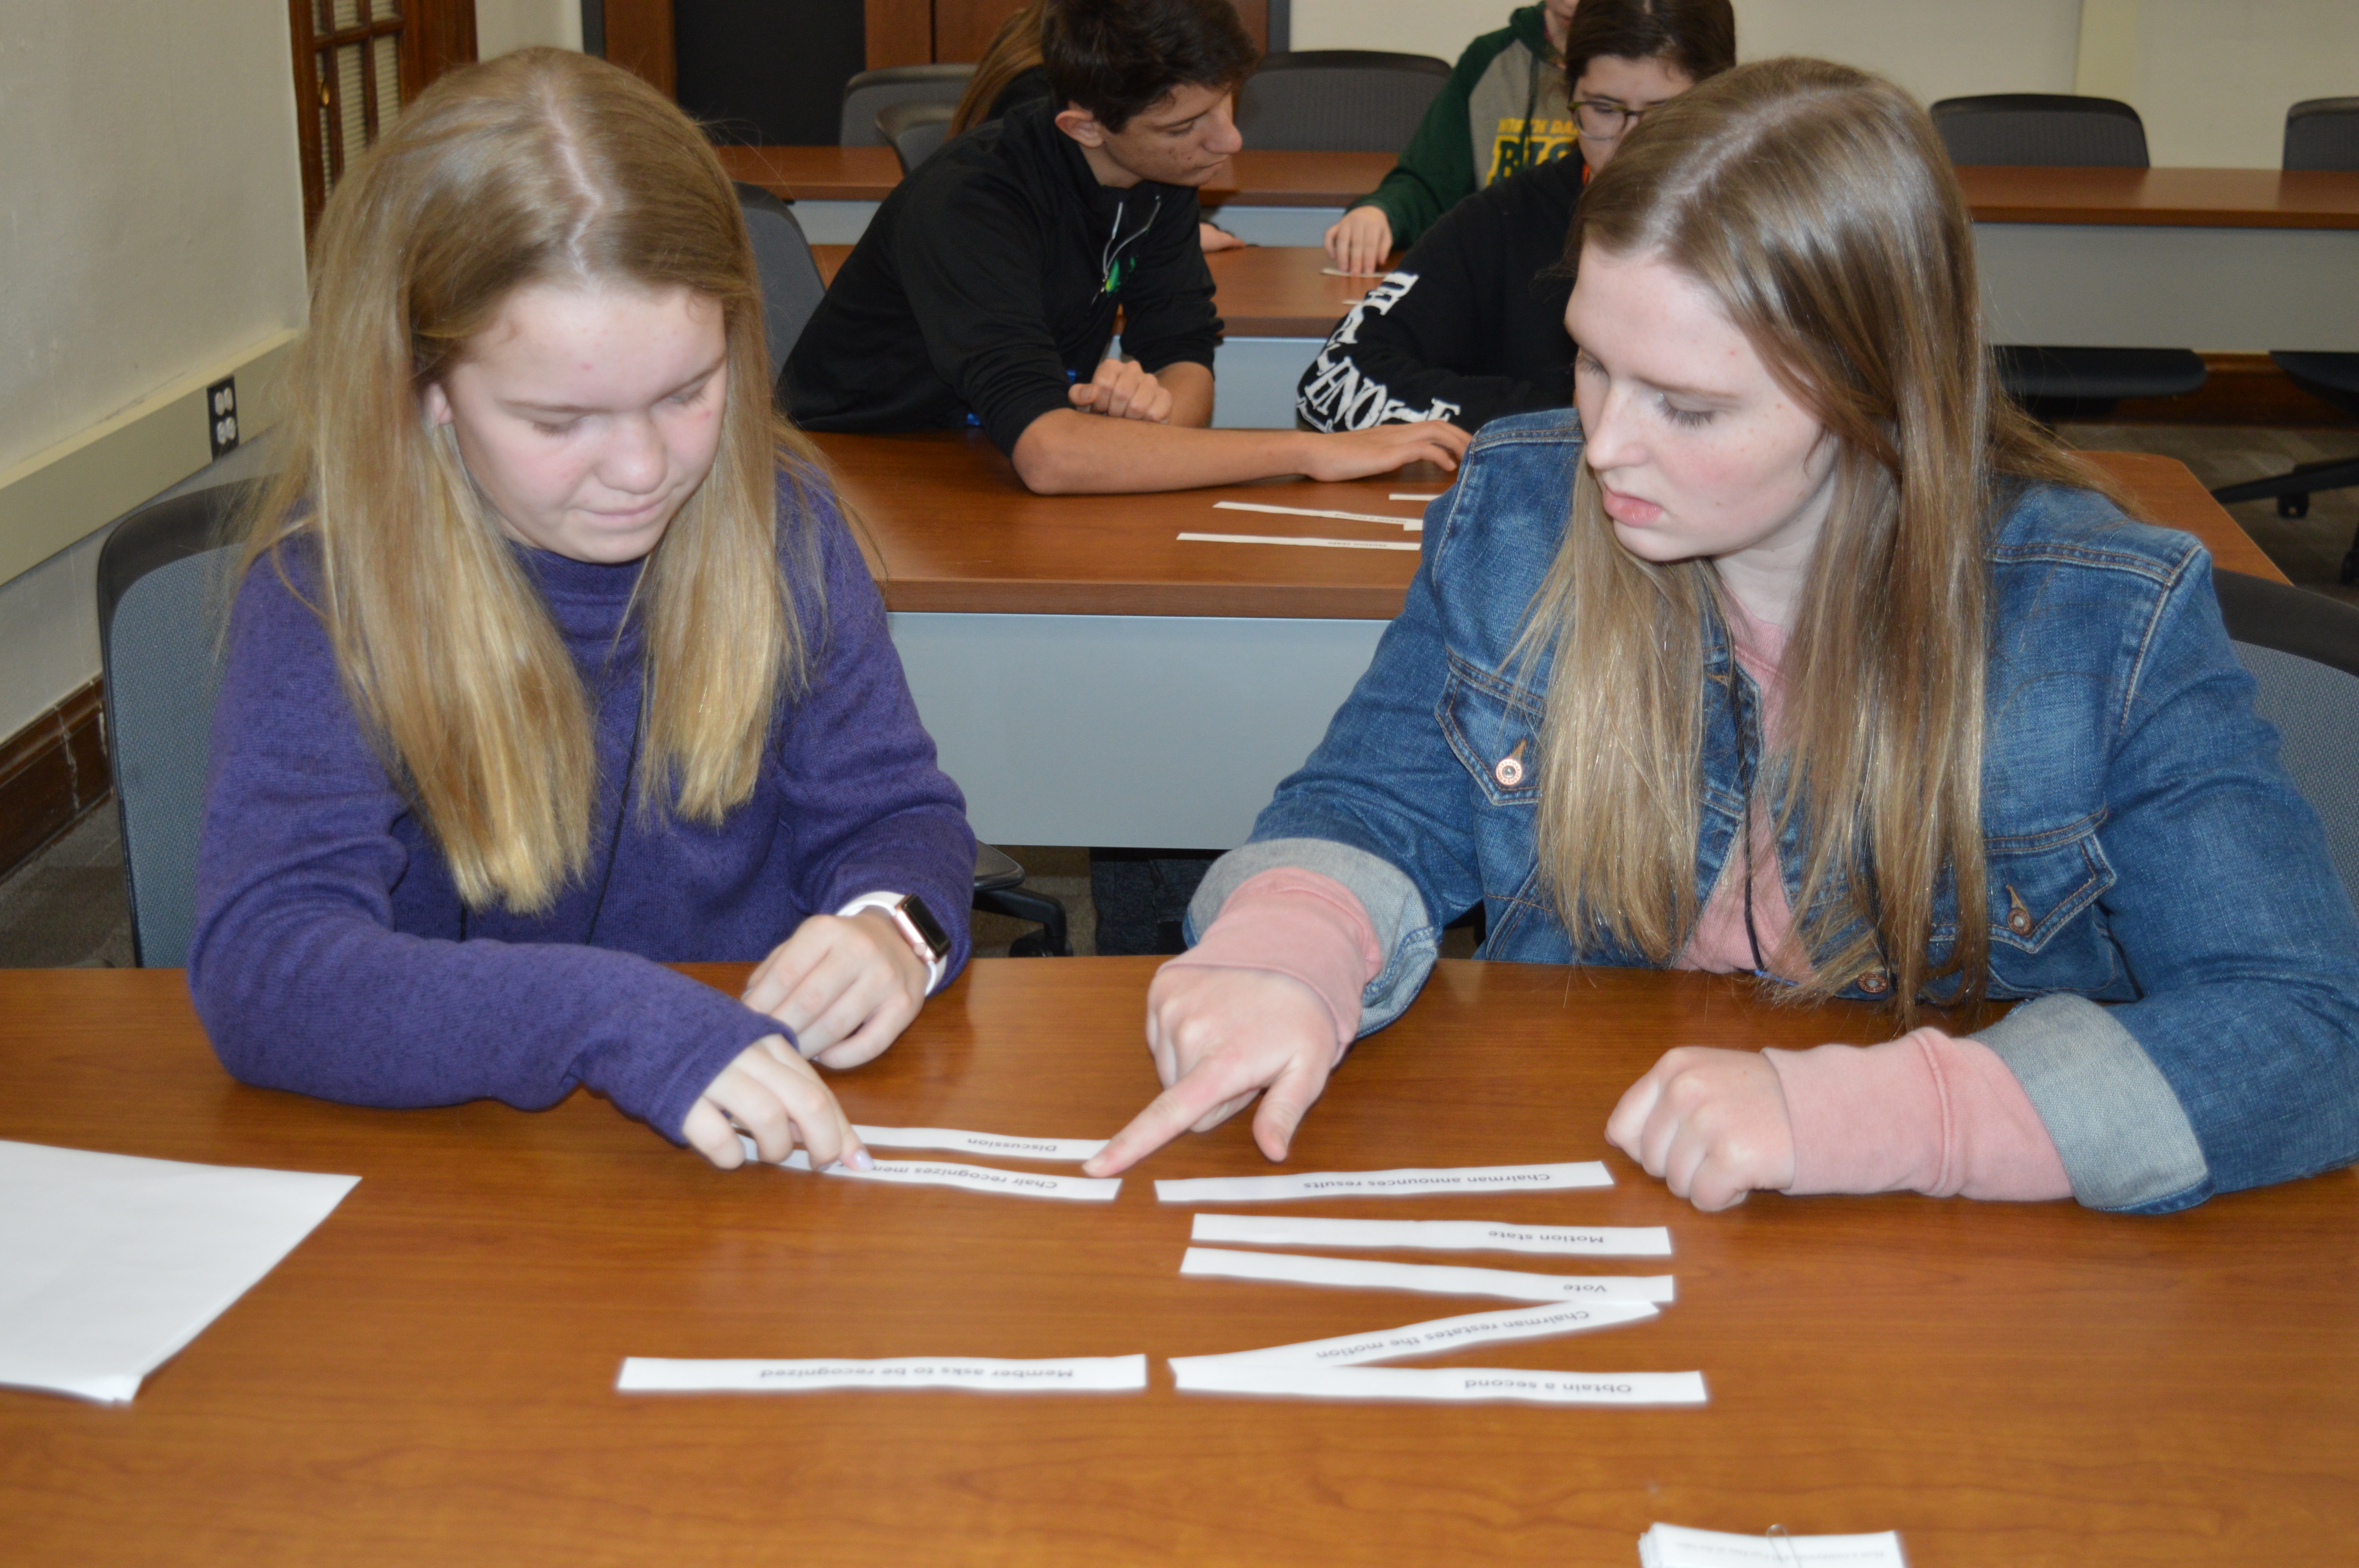 Youth learn about the judicial system by deciphering puzzles to get codes that opened locks on a box during the Leadership Awareness Weekend that NDSU Extension's Center for 4-H Youth Development hosted. (NDSU photo)